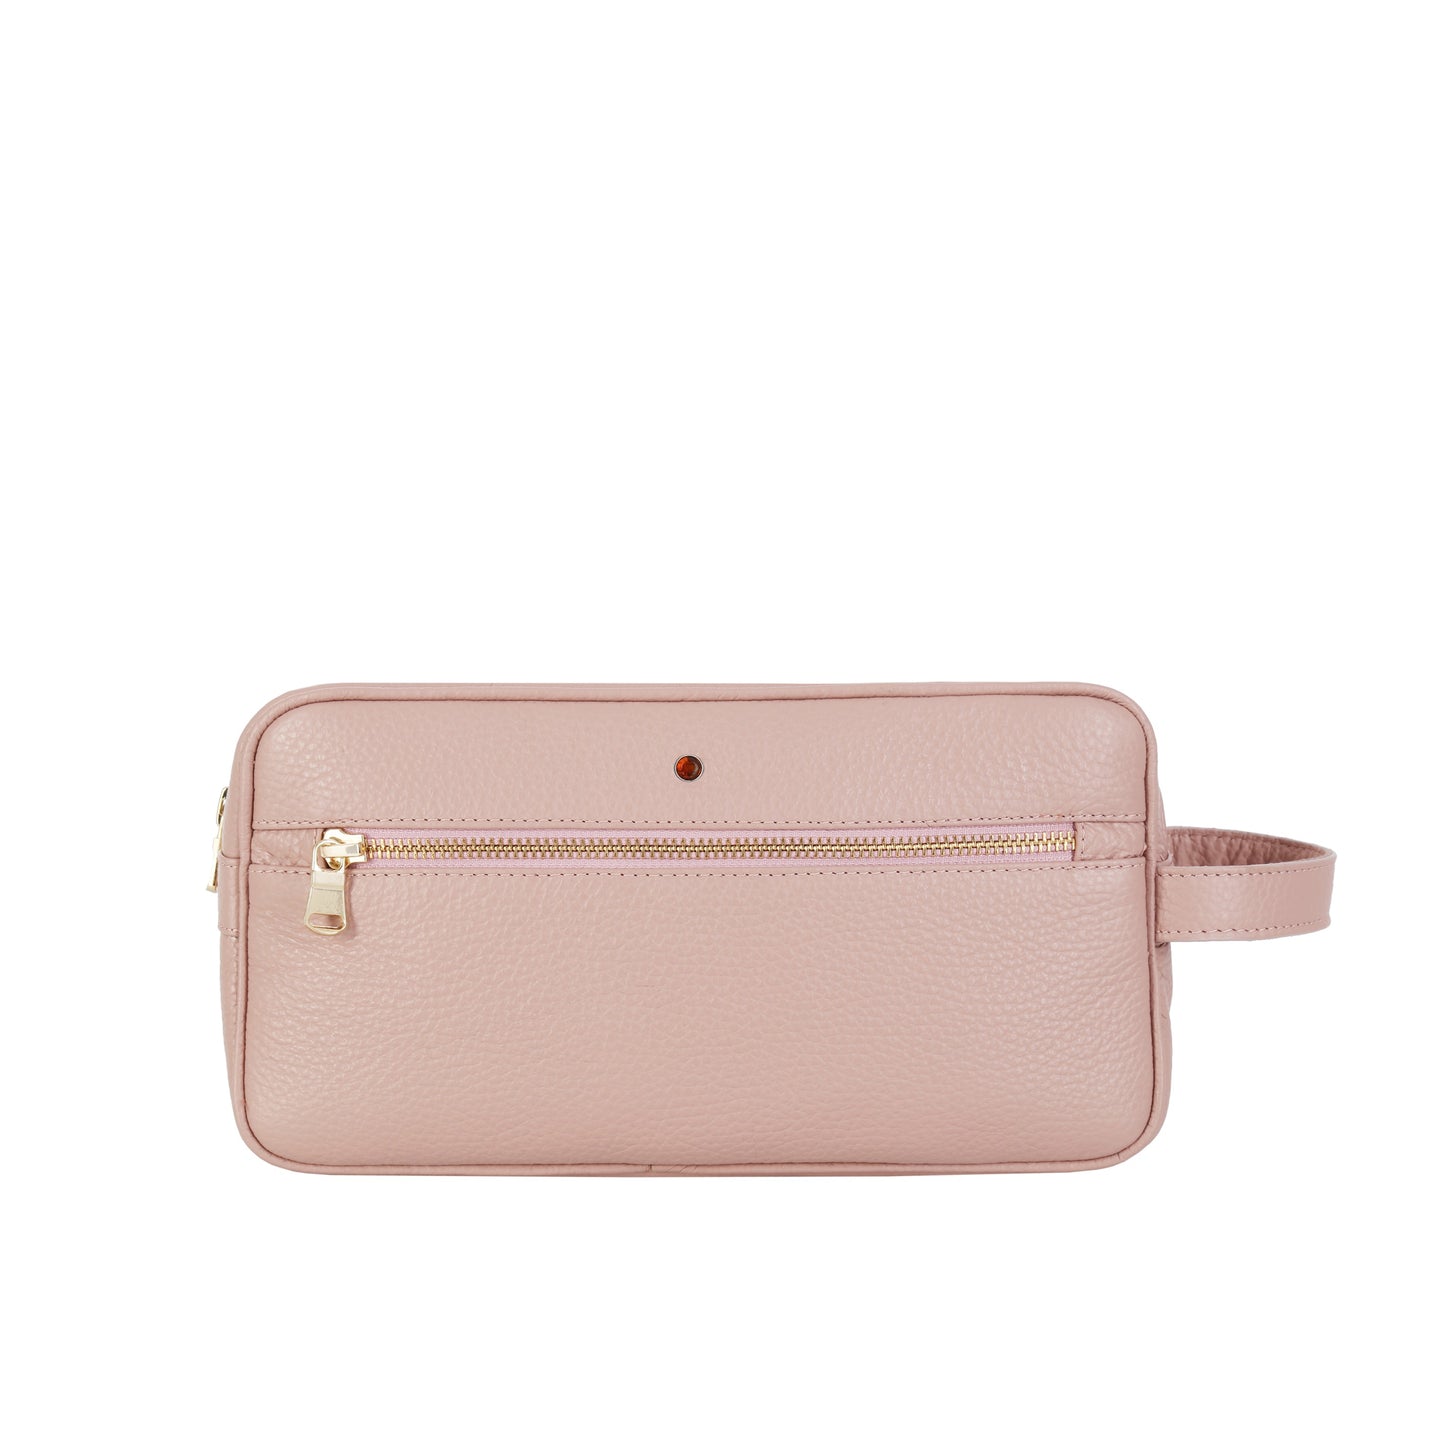 Women's leather cosmetic bag FLOTER POWDER PINK